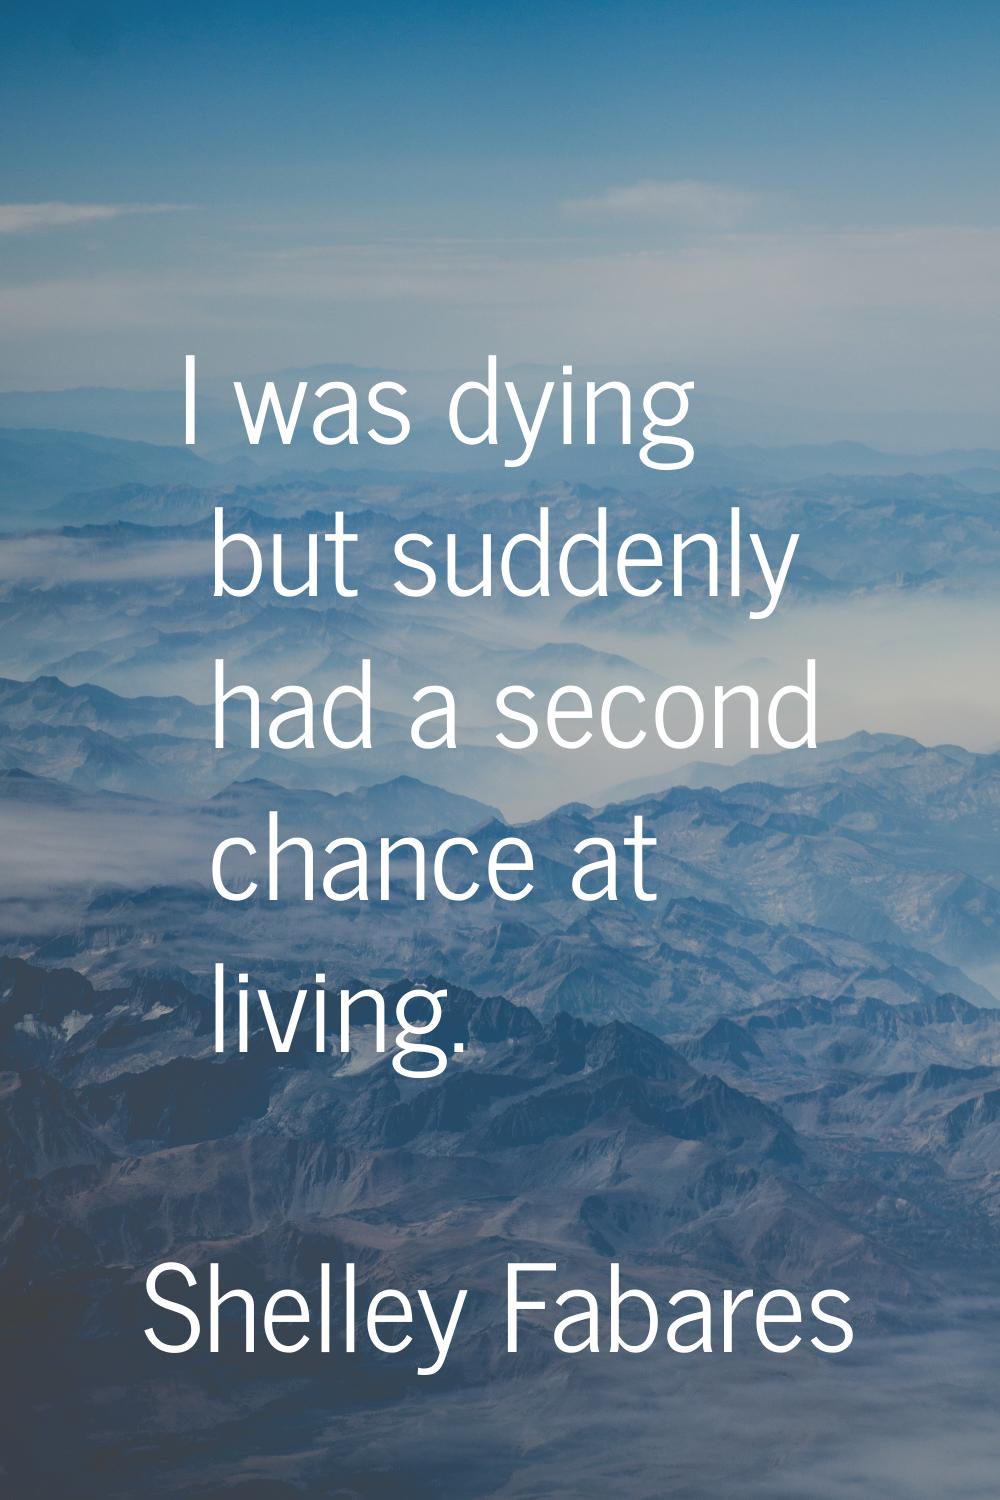 I was dying but suddenly had a second chance at living.